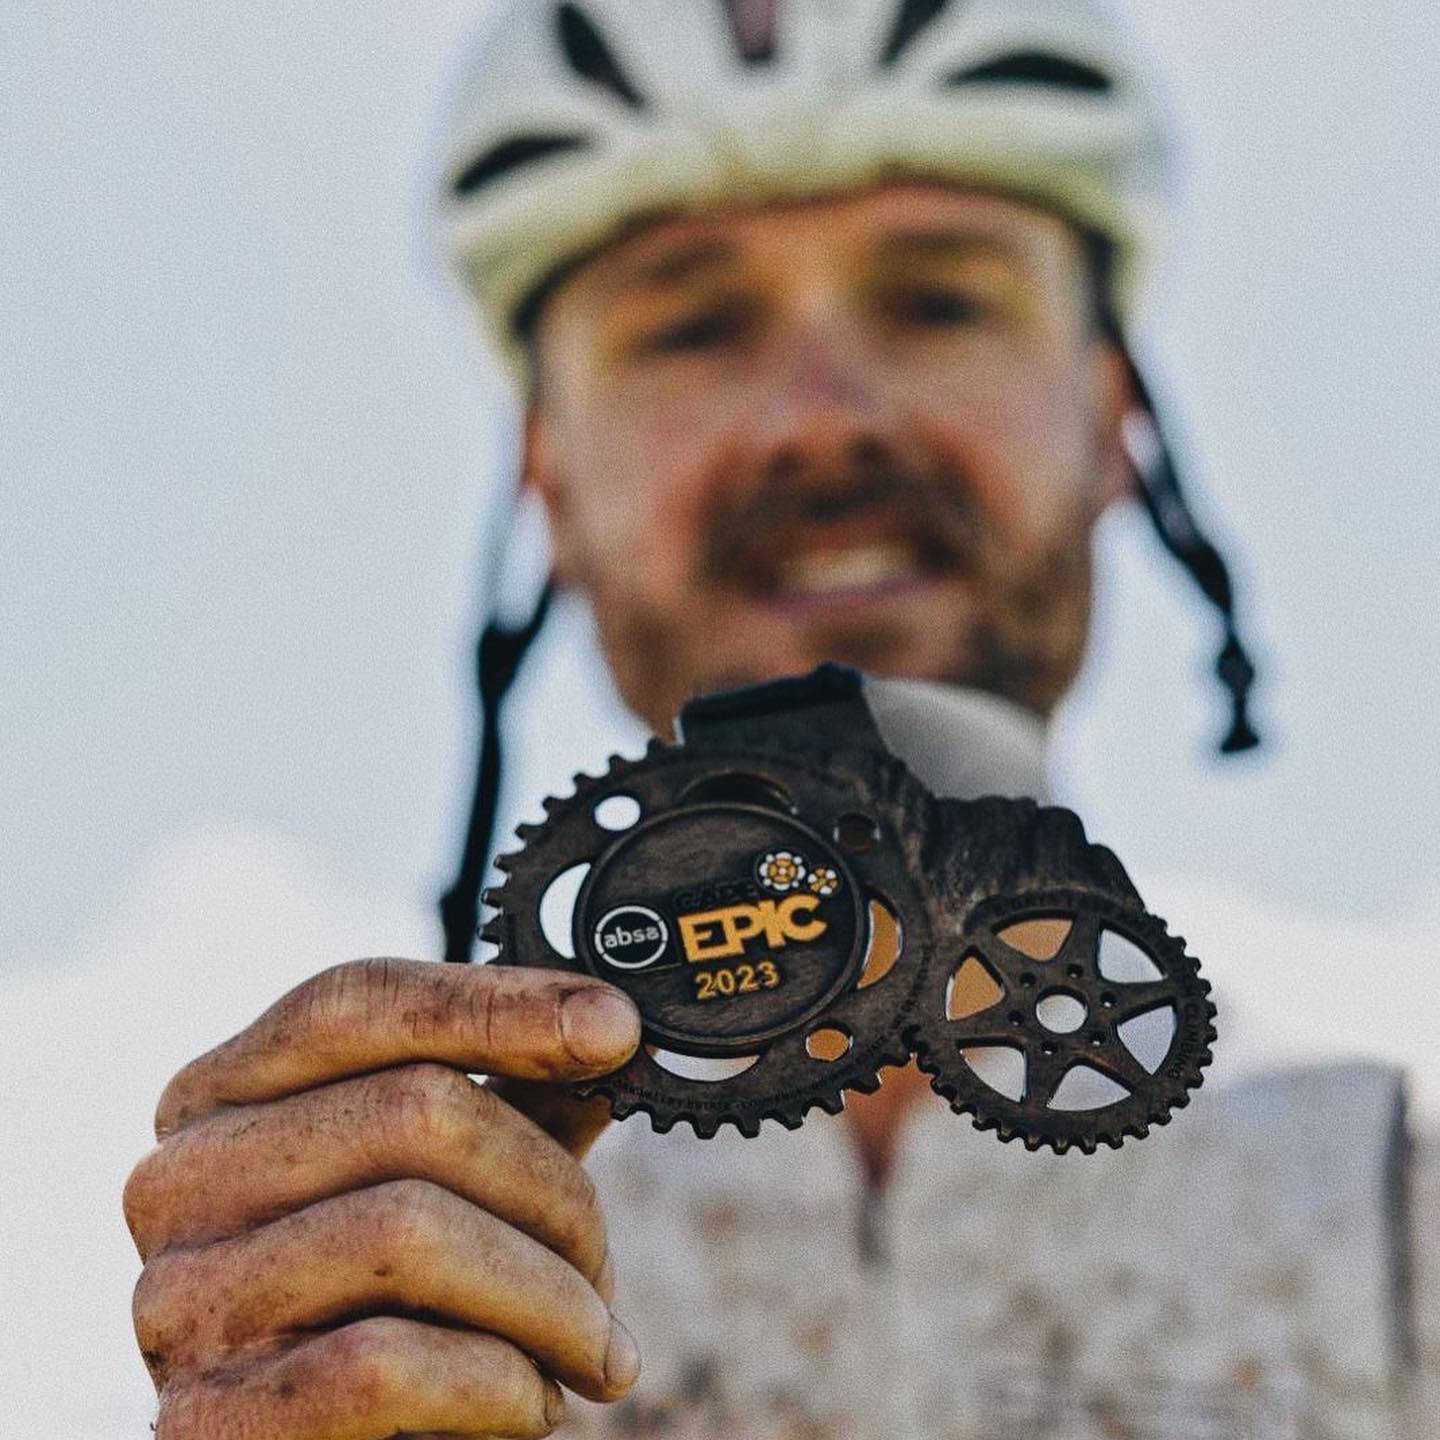 Gosse and his Cape Epic Medal